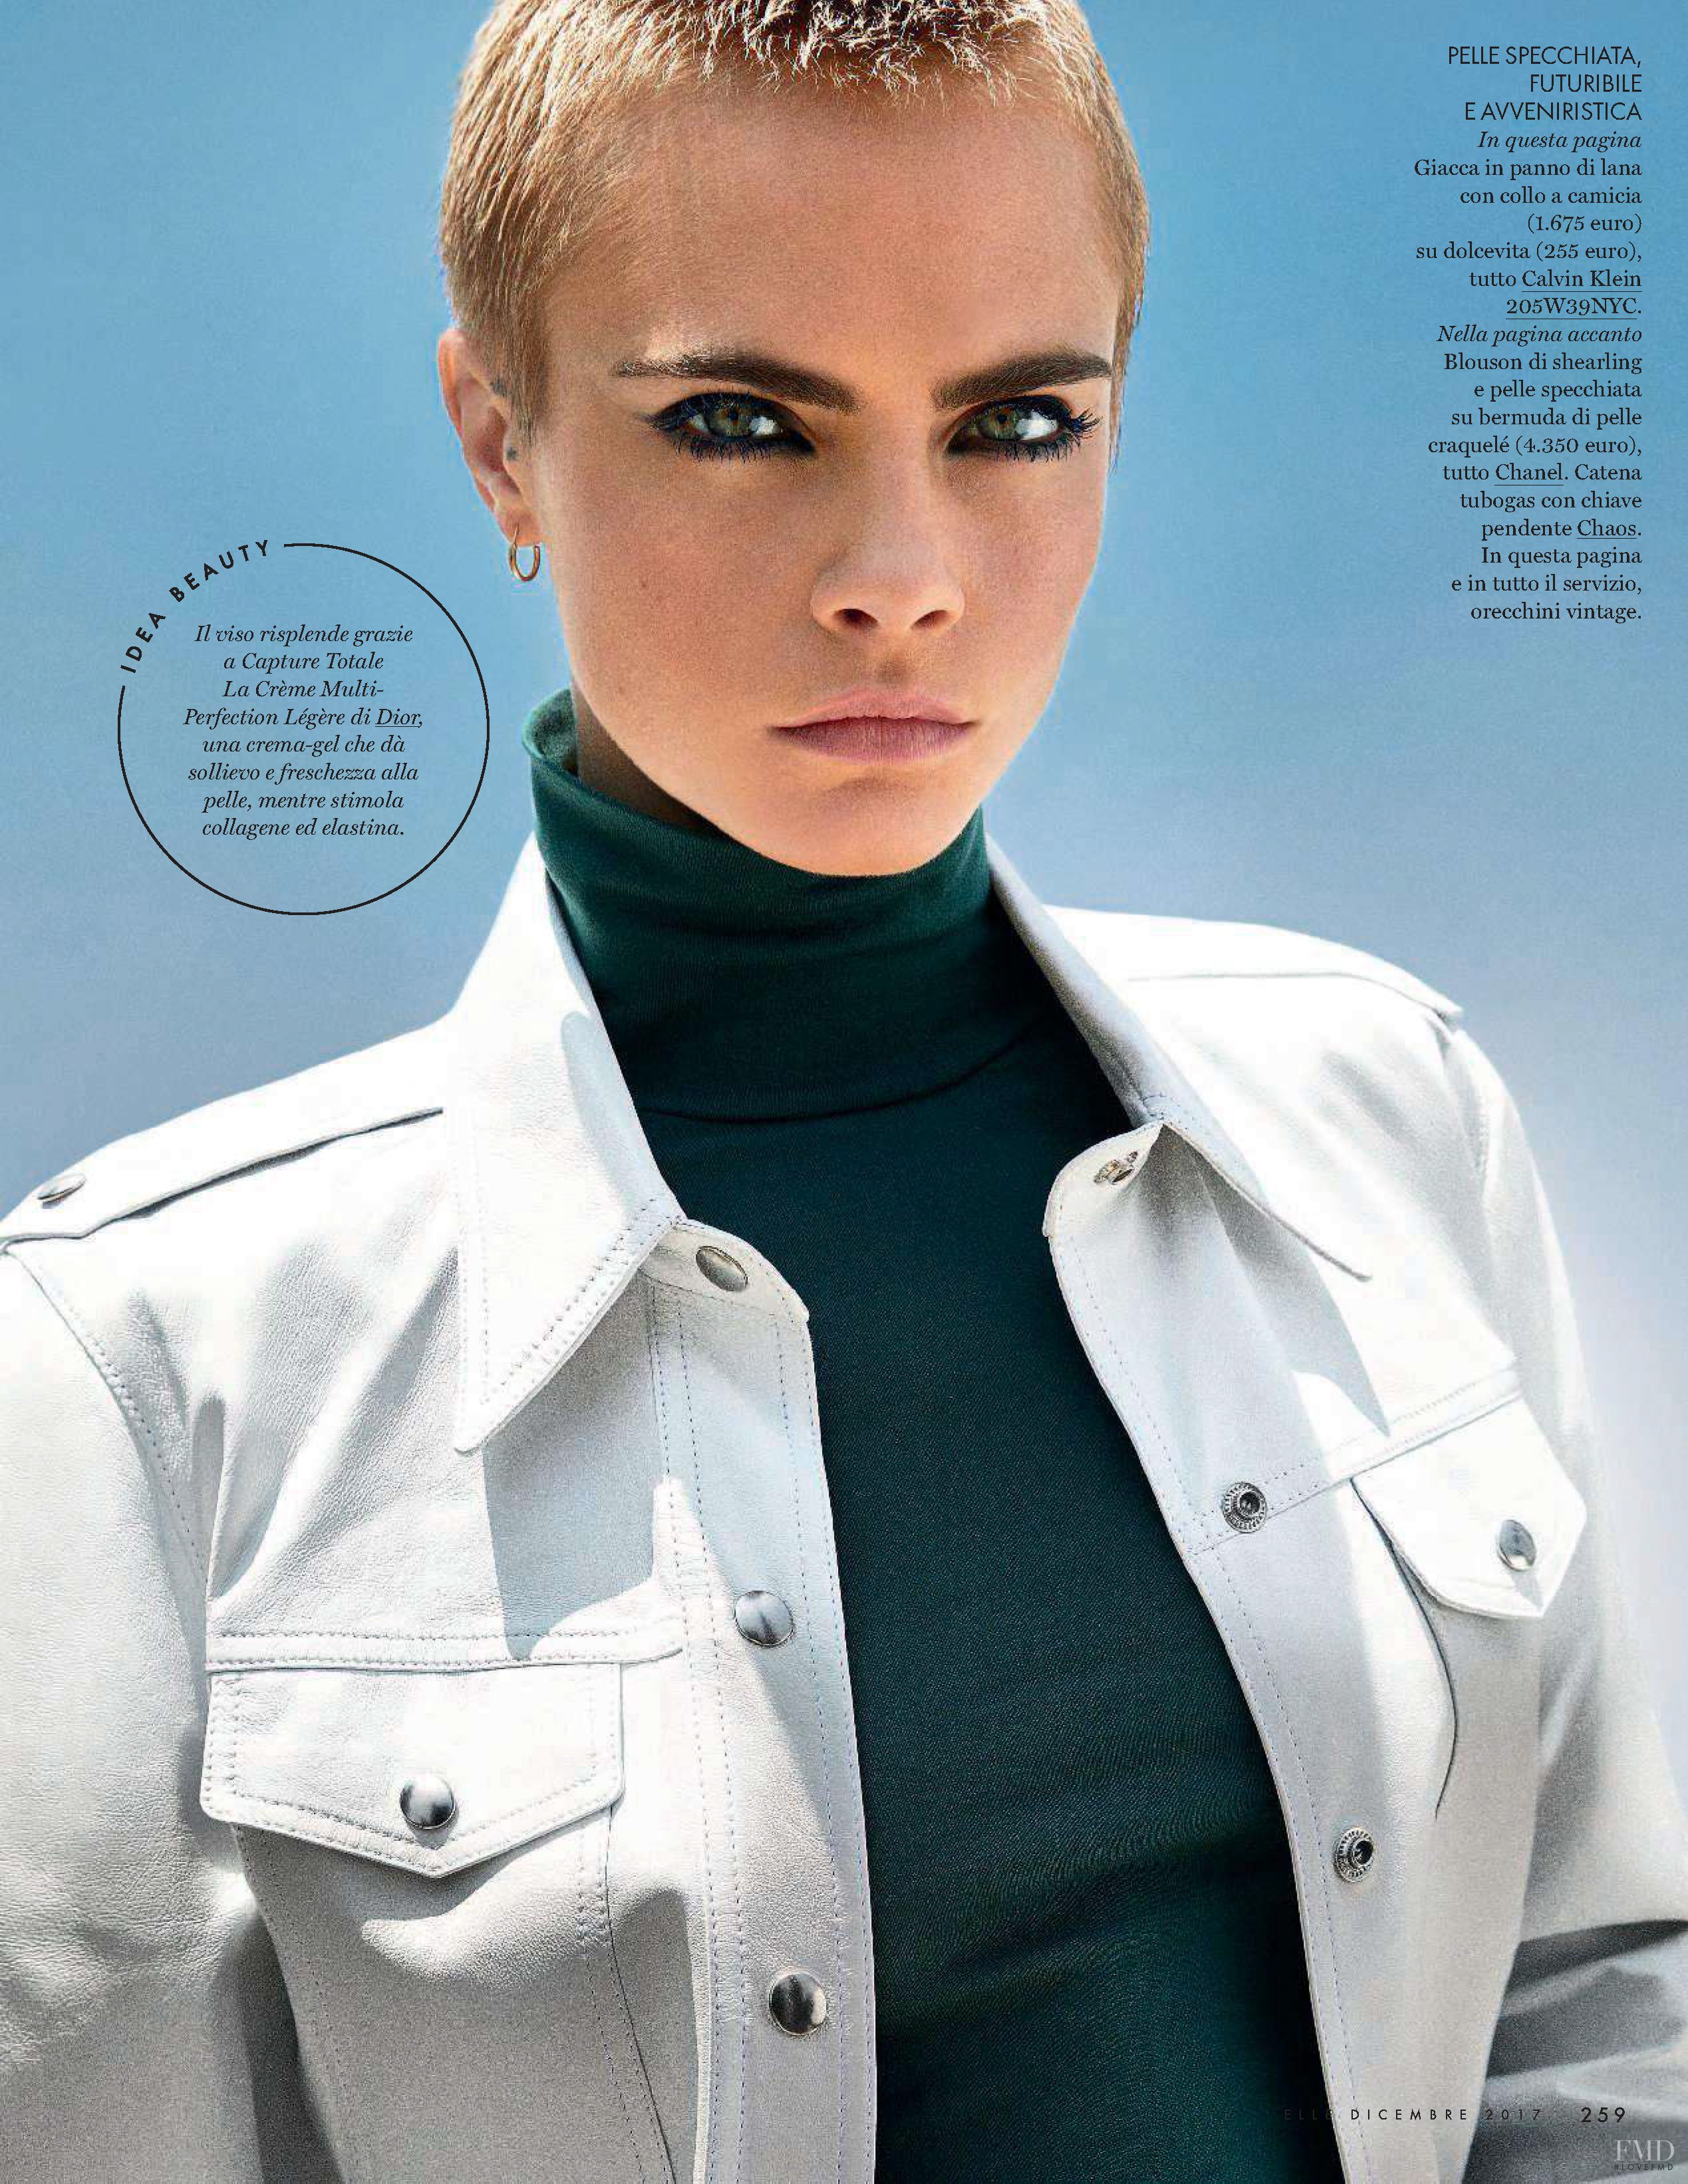 Cara in Elle Italy with Cara Delevingne wearing Calvin Klein 205W39NYC ...